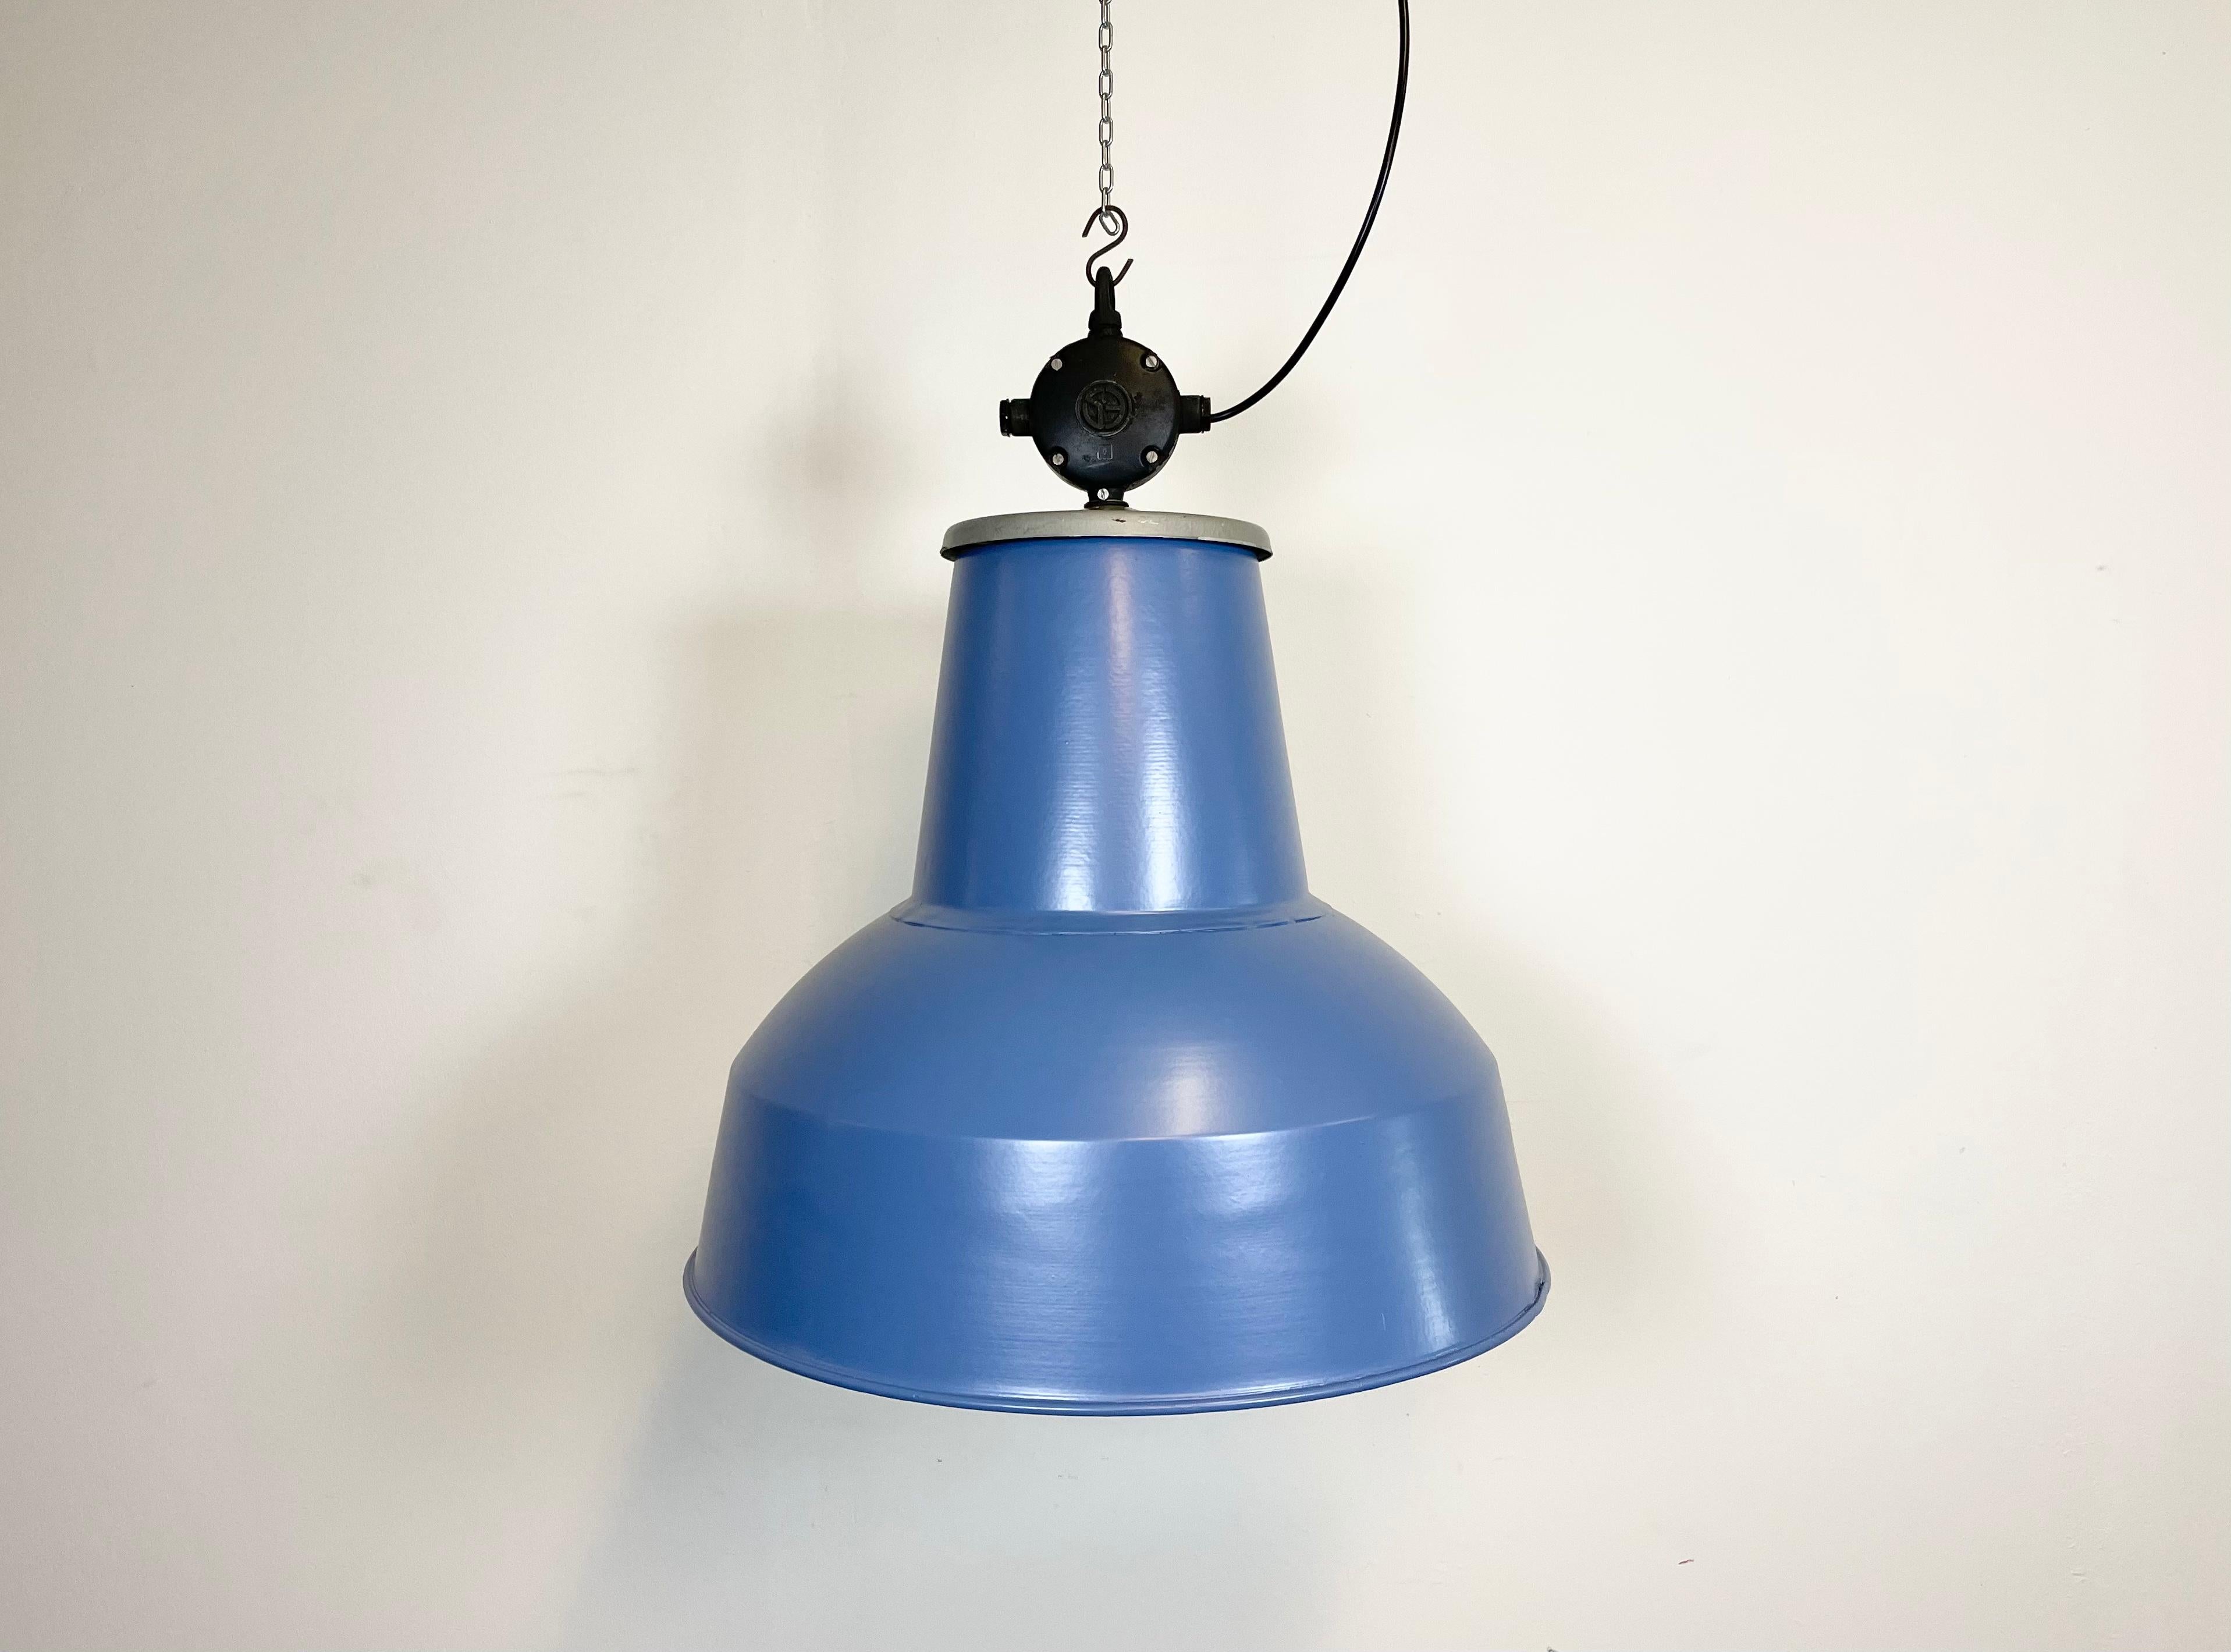 This blue Industrial pendant light was designed in the 1960s and produced by Elektrosvit in the former Czechoslovakia. It features a cast aluminium top, a newly blue painted exterior and a white enamel interior.
New porcelain socket requires E 27